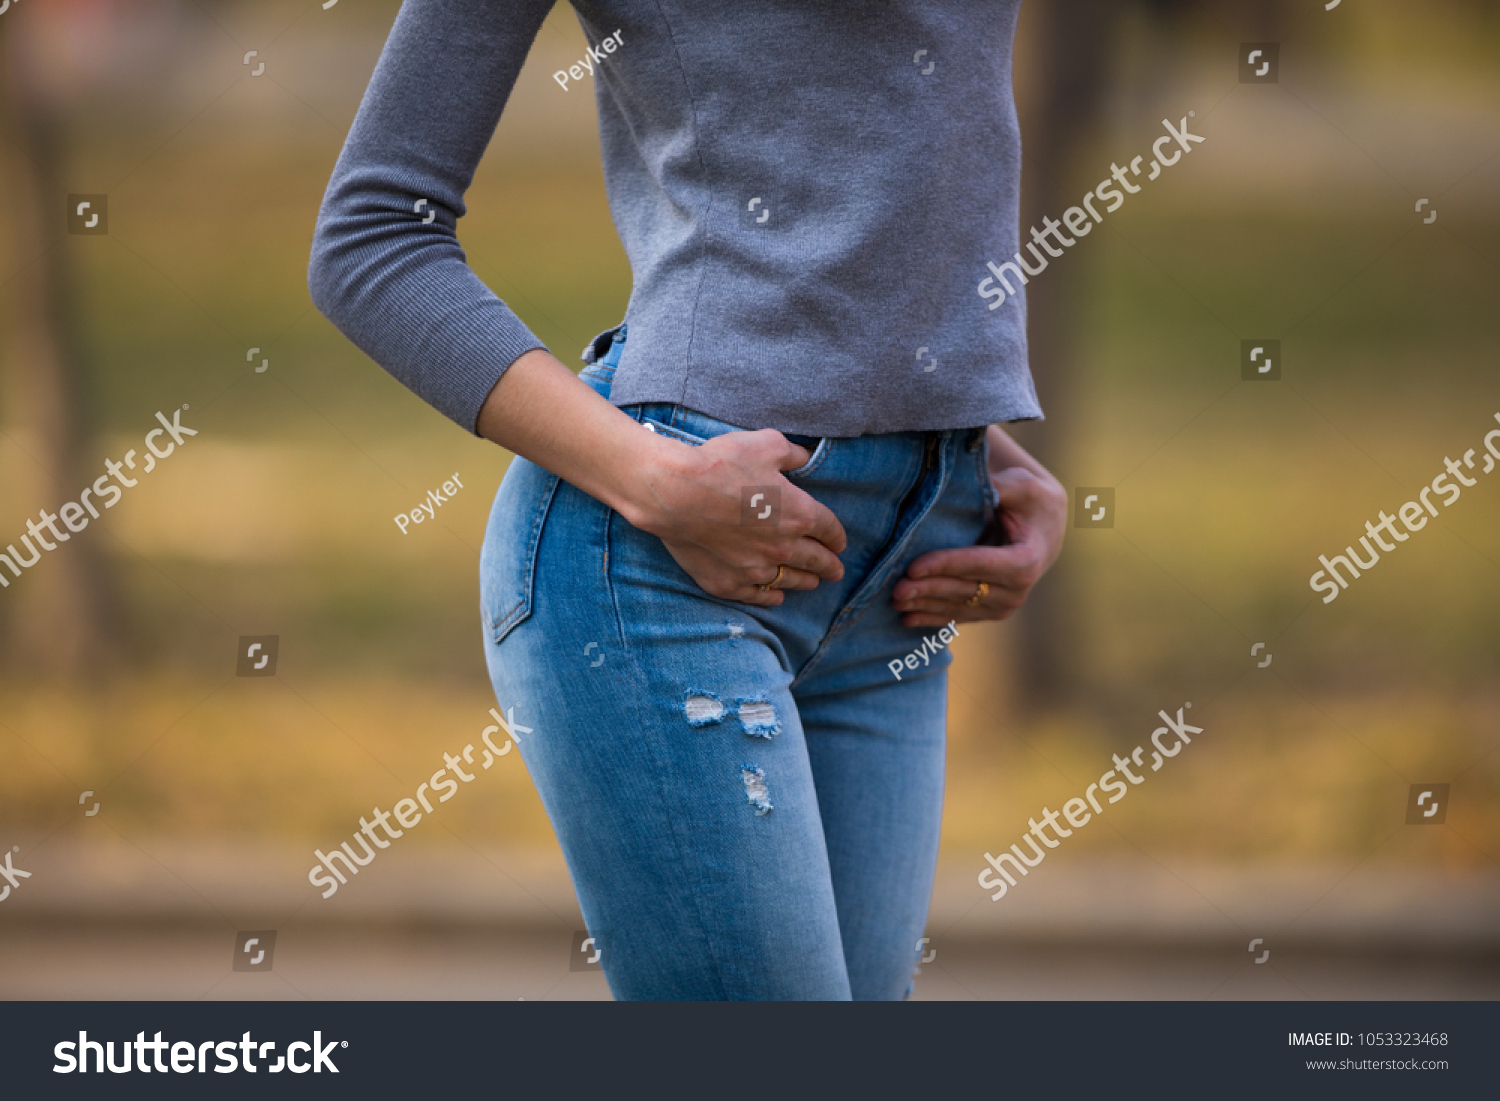 Ass jeans teens in Category:Boys' buttocks